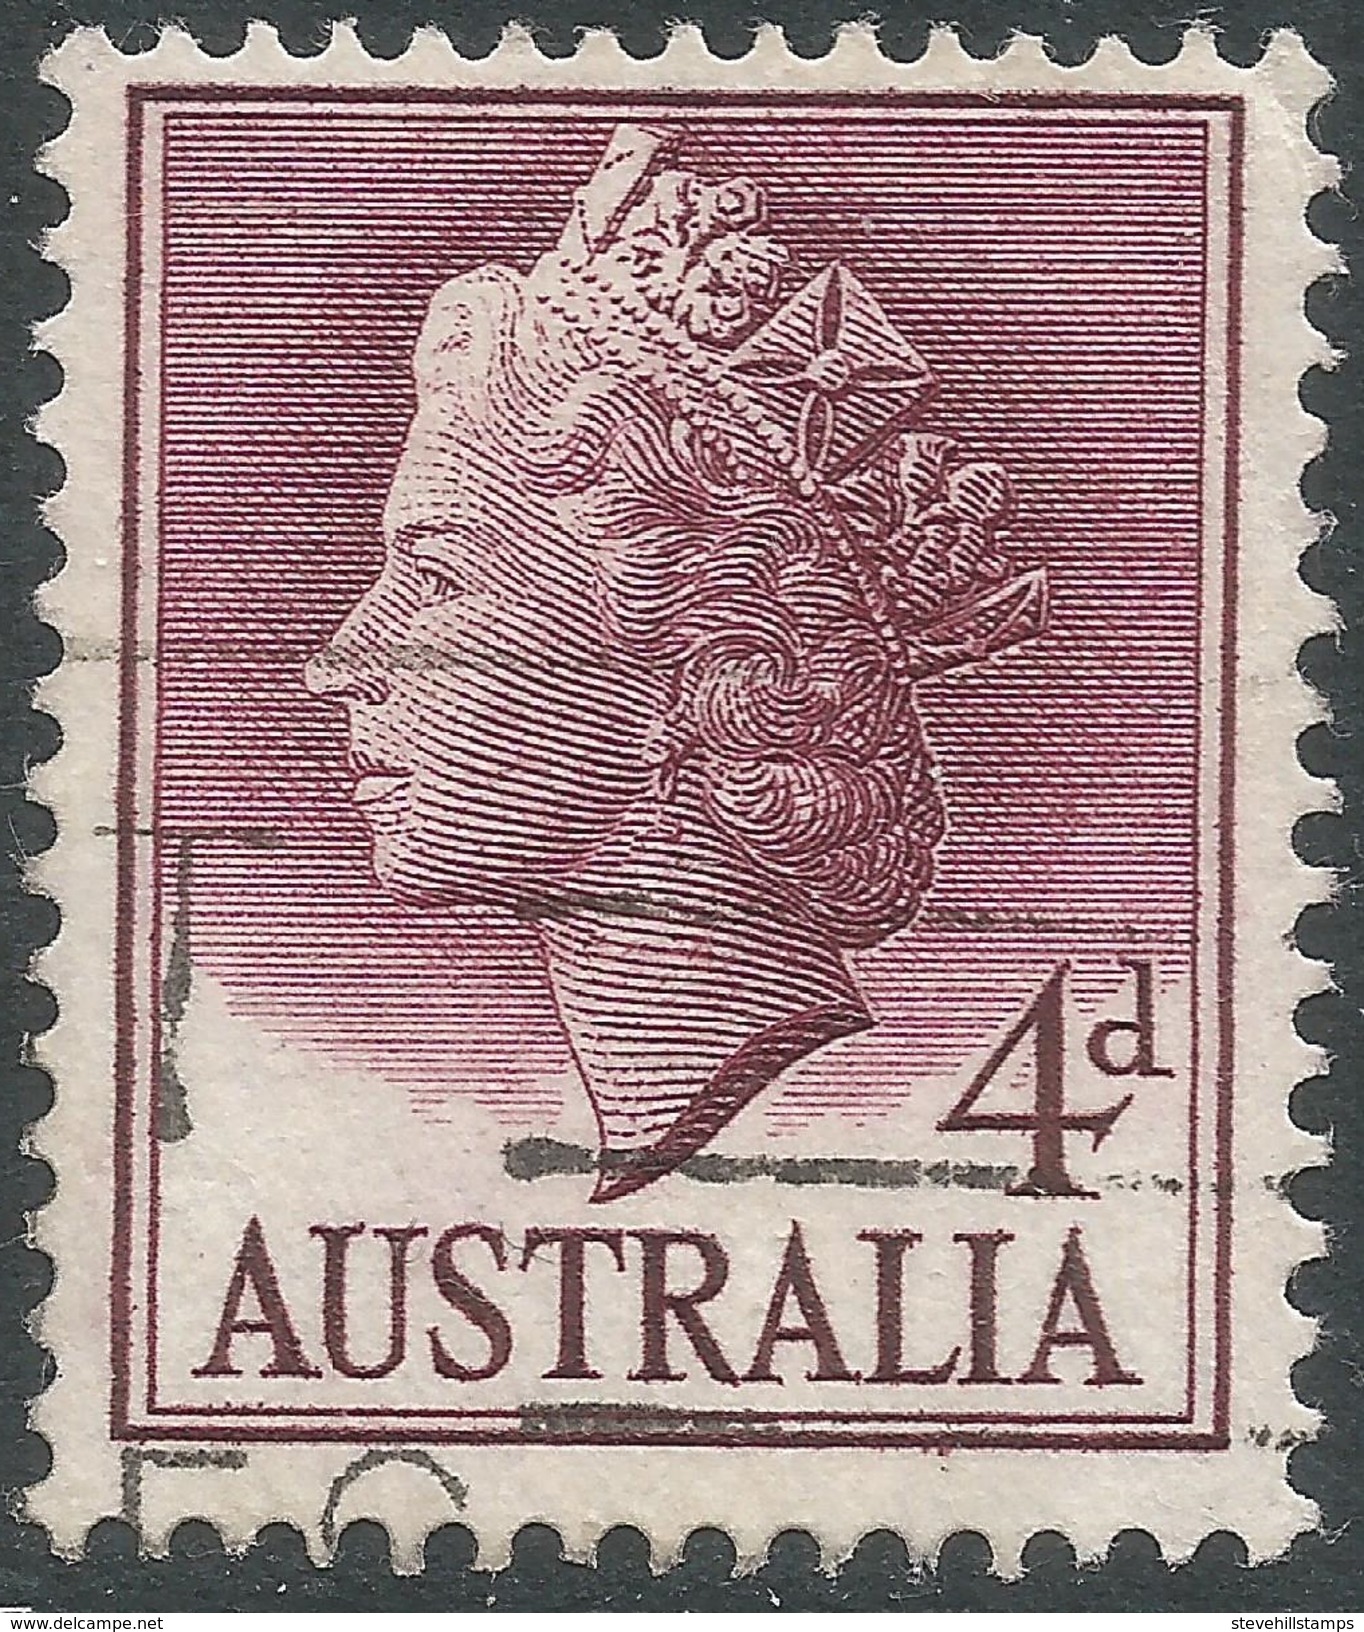 Australia. 1955-7 QEII Definitives. 4d Used. SG 282a - Used Stamps